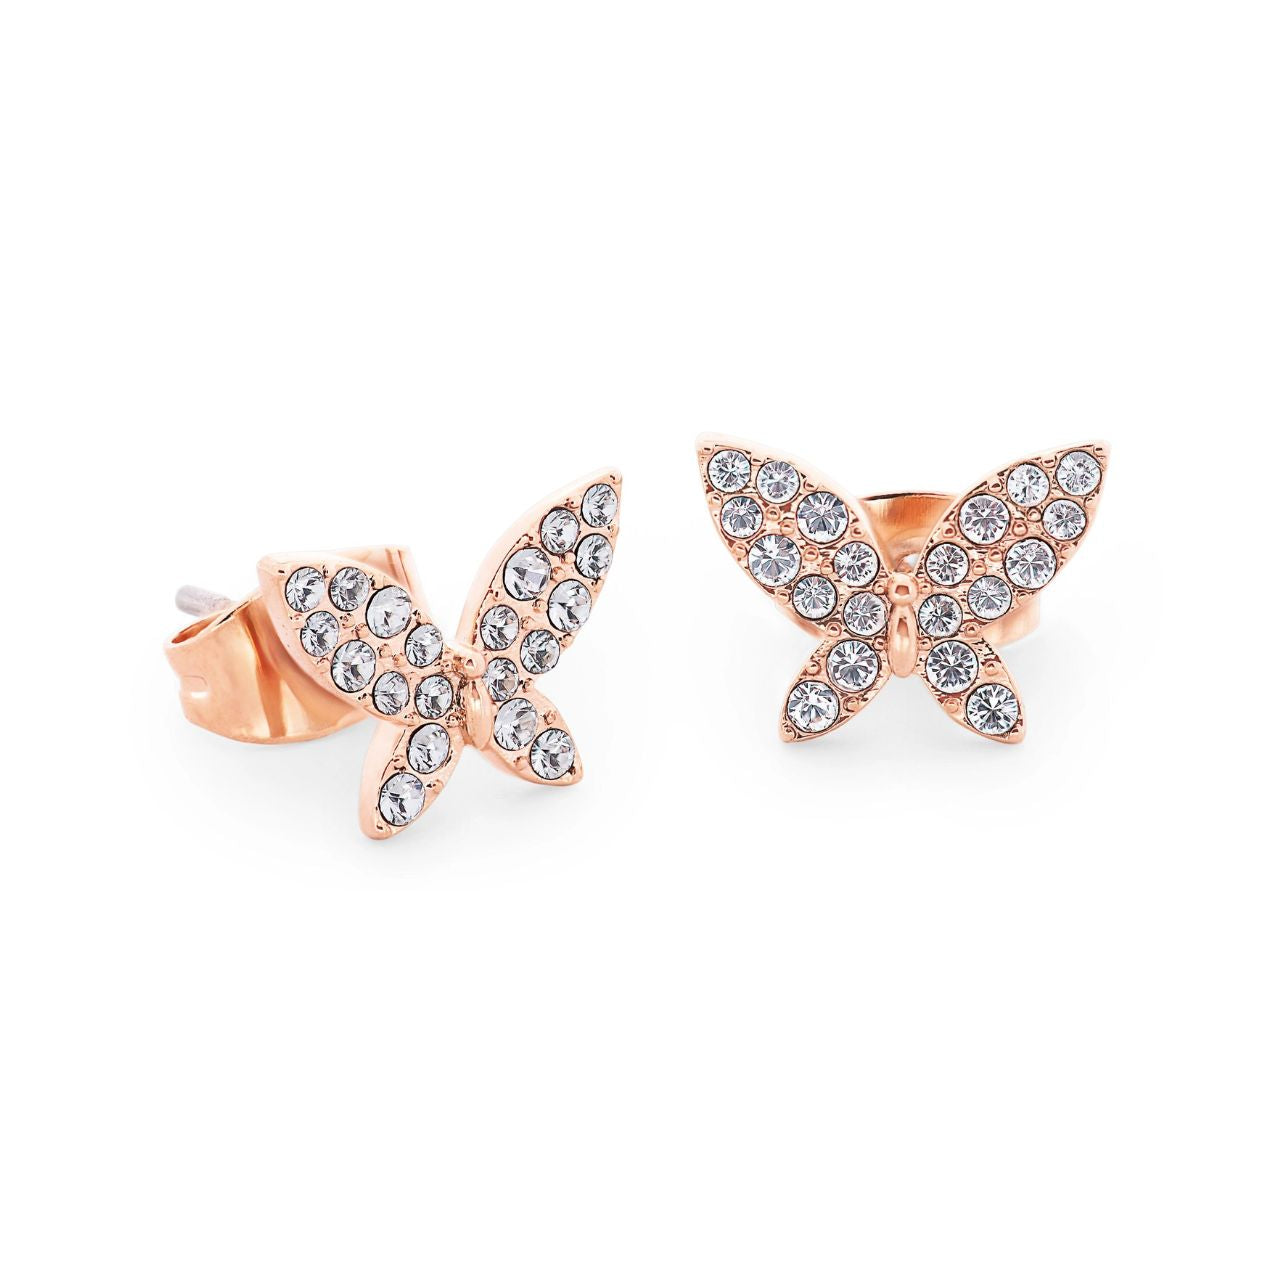 Tipperary Crystal Butterfly Rose Gold Stud Earrings  Drawing inspiration from urban garden, the Tipperary Crystal Butterfly collection transforms an icon into something modern and unexpected. Playful and elegant, this collection draws from the inherent beauty of the butterfly. The butterfly appealed as a Jewellery theme to our designers who have dedicated a full jewellery collection to these delicate creatures.